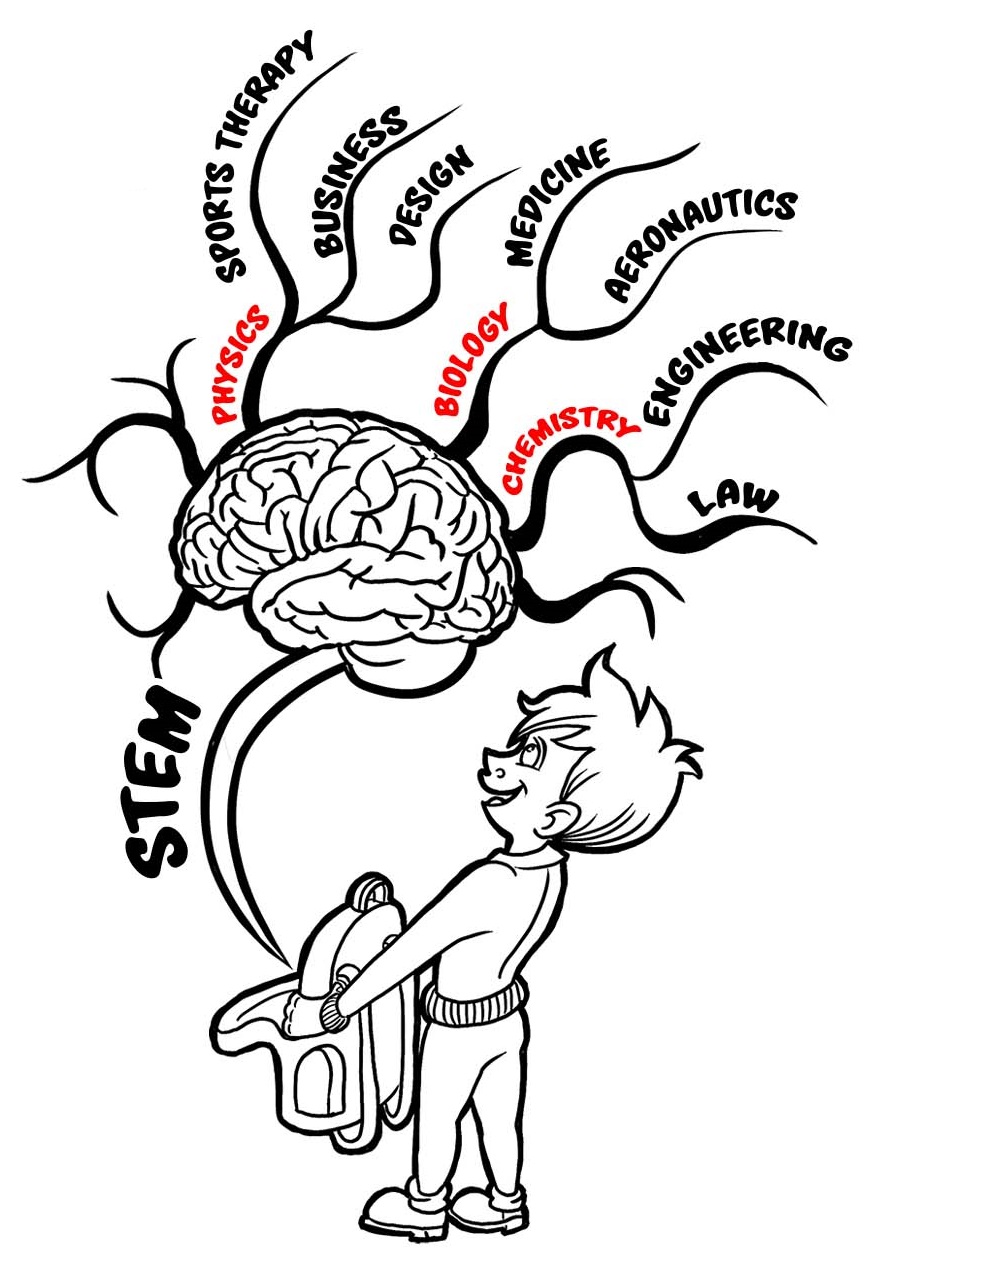 Illustration of boy holding open backpack with STEM careers growing out of it e.g. medicine, engineering, business, design, sports therapy, law.